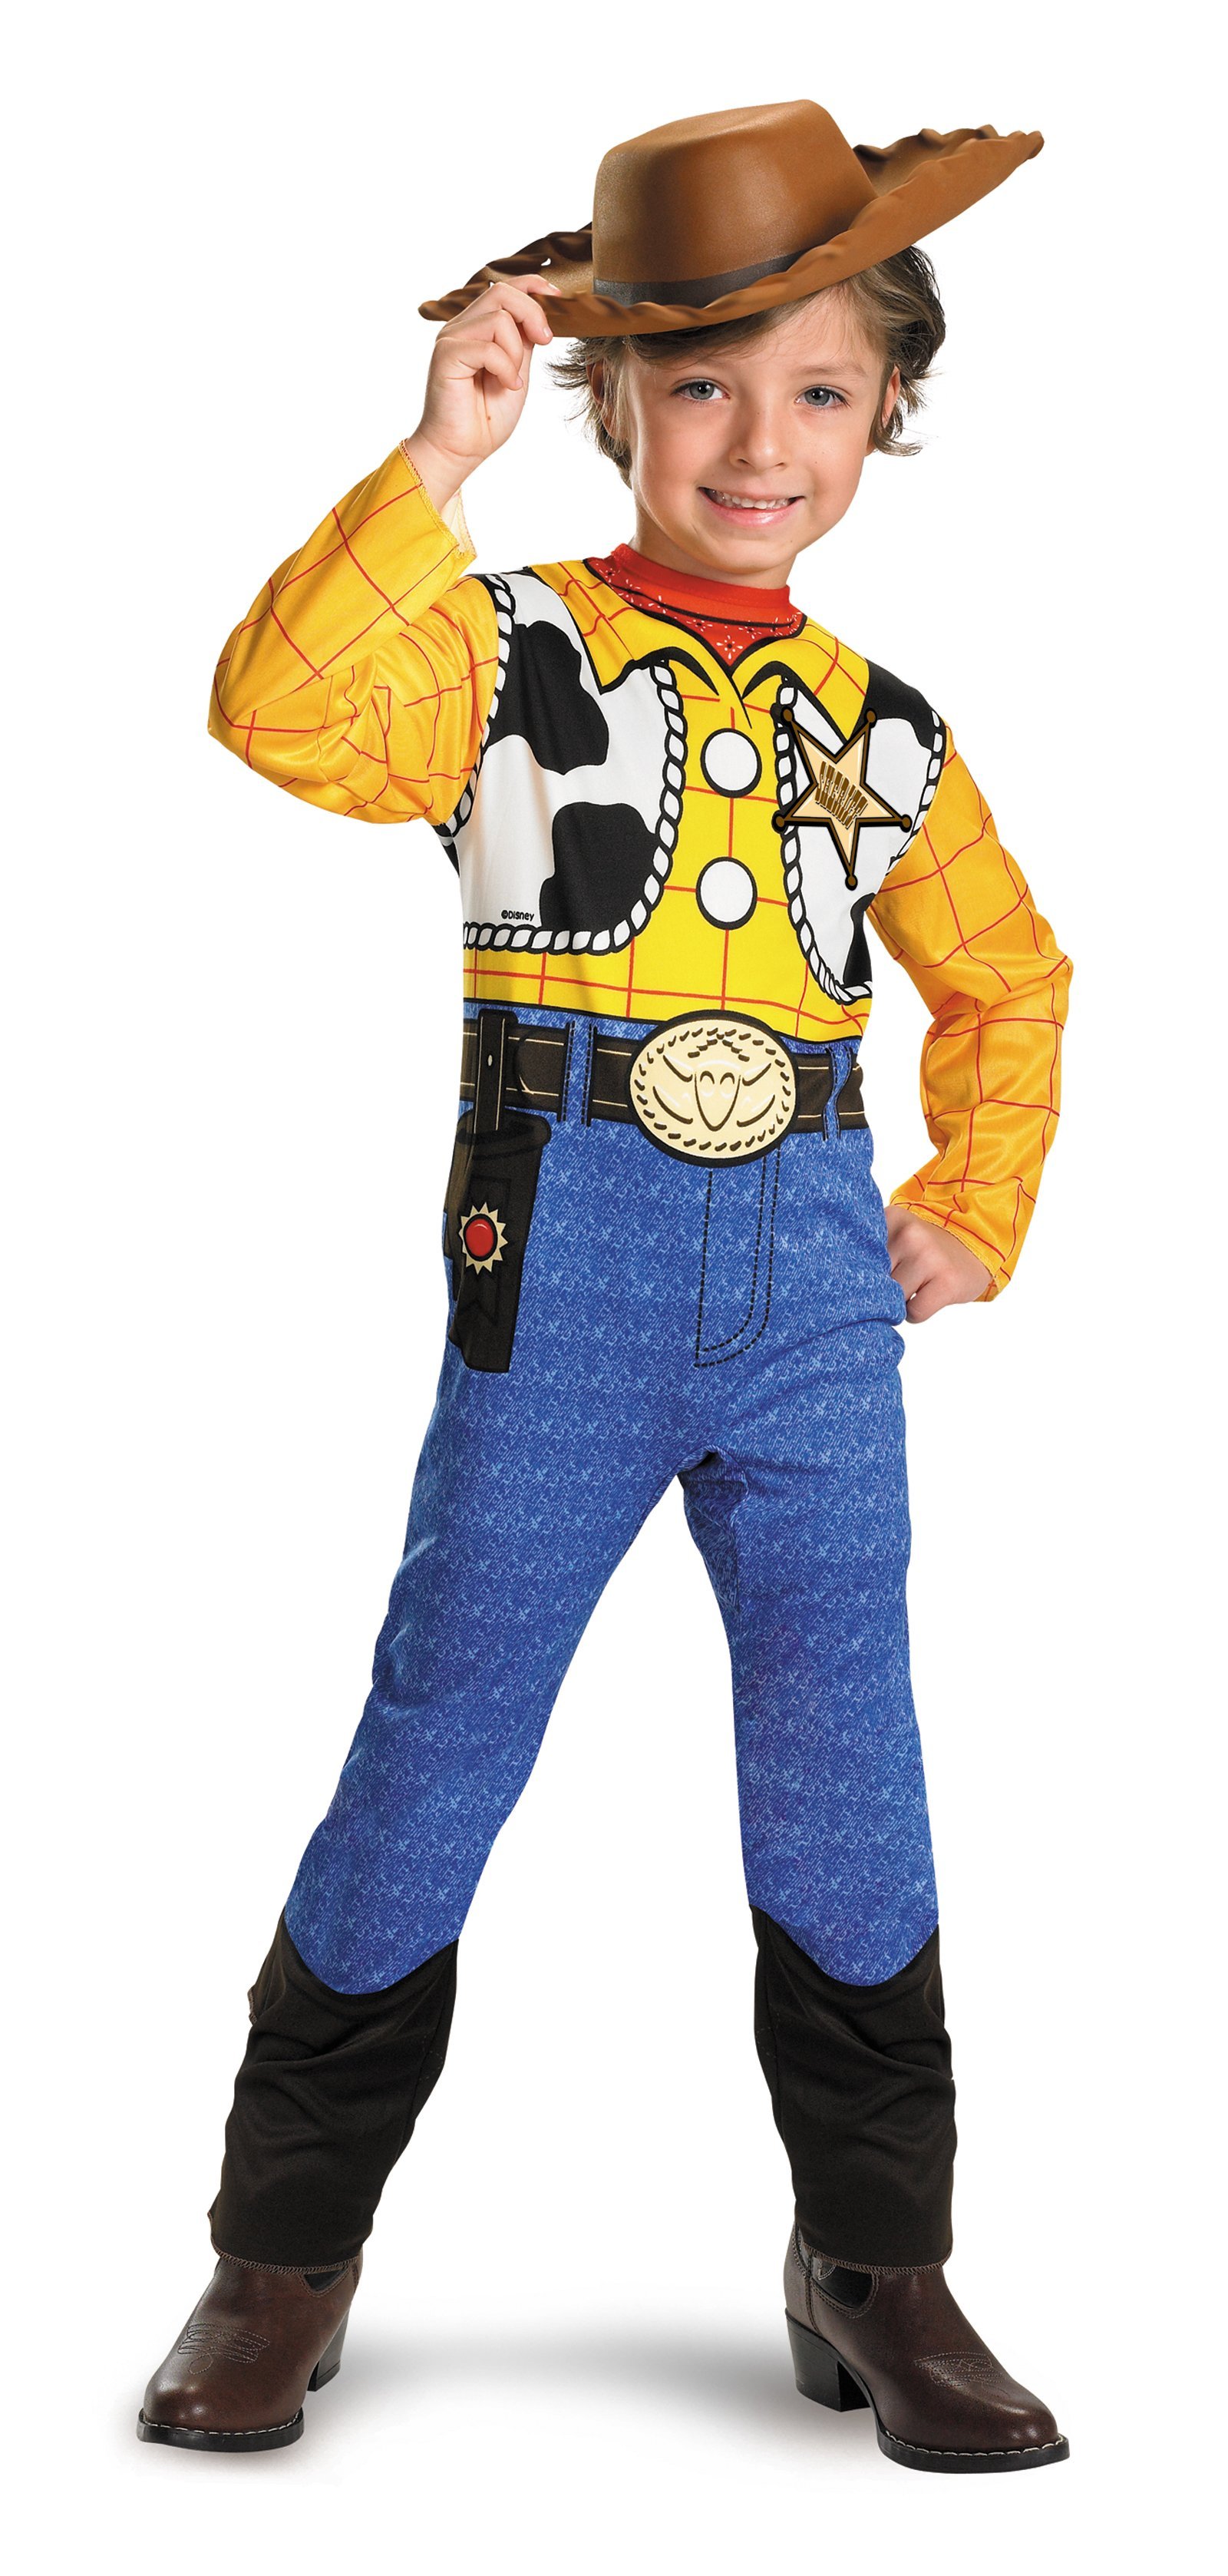 Disney Toy Story - Woody Classic Toddler / Child Costume